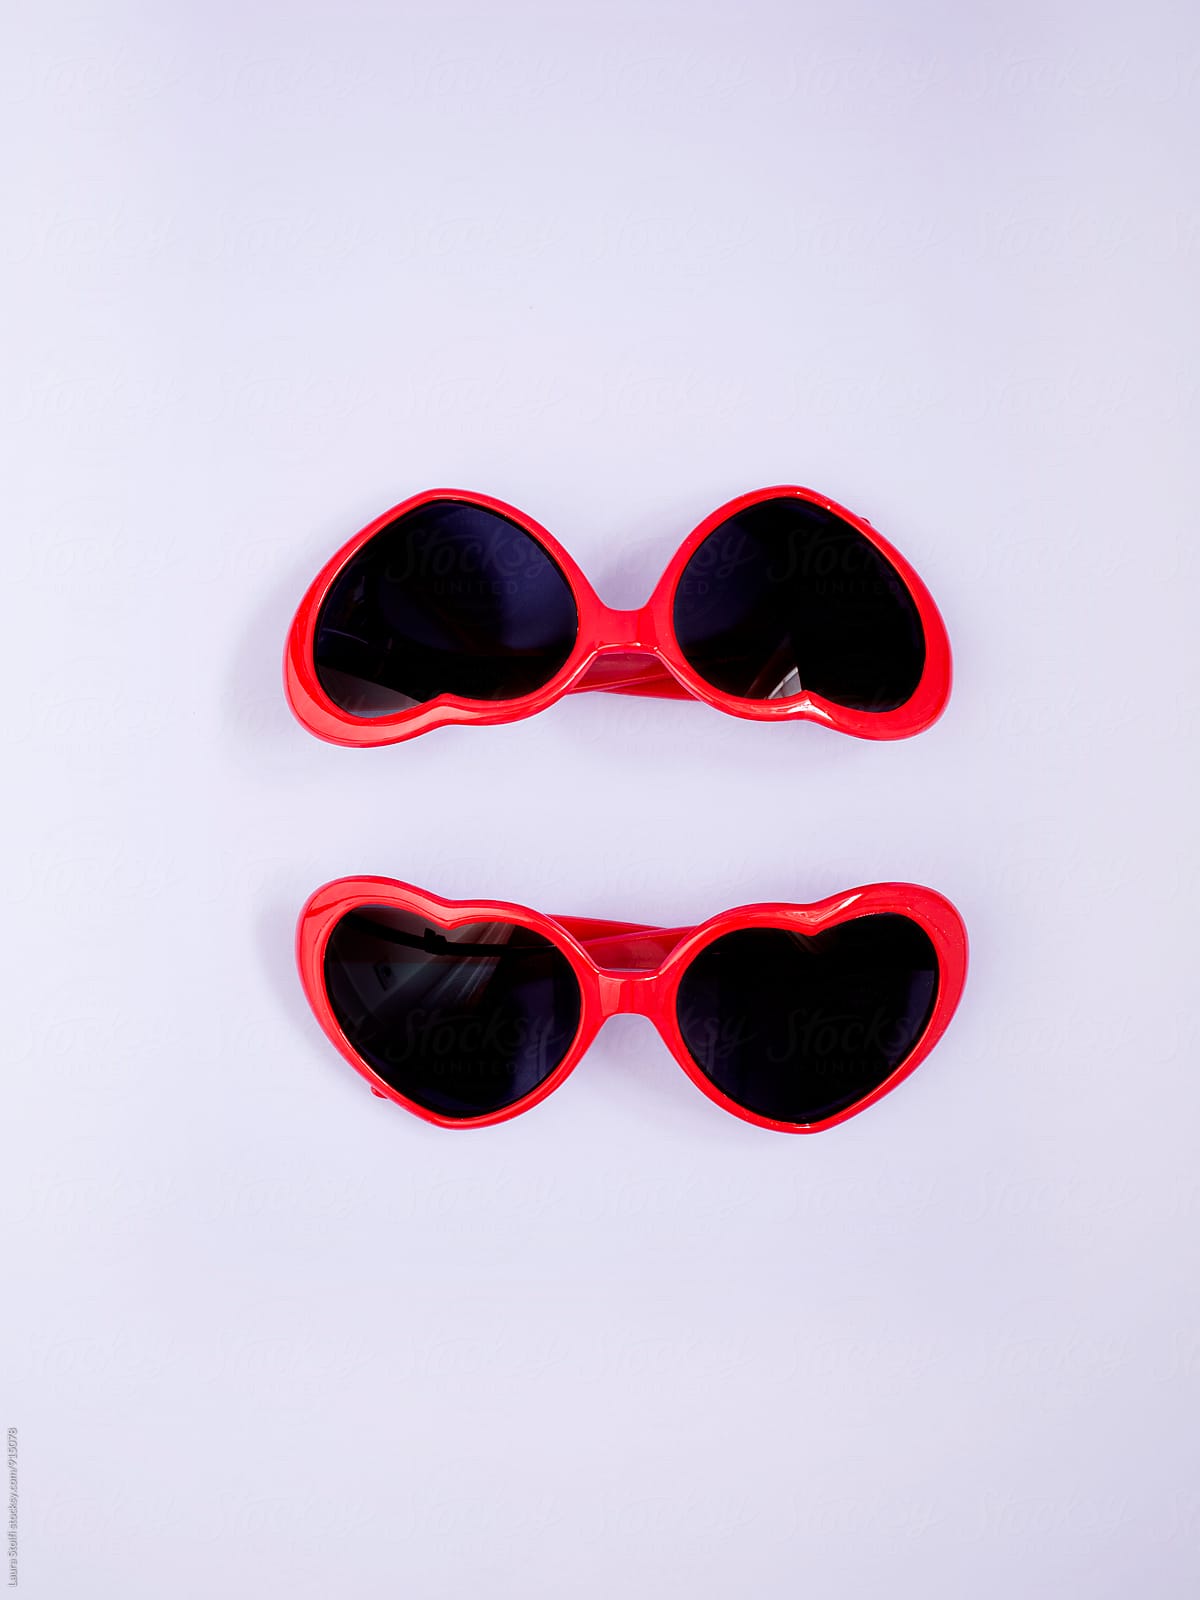 Two heart shaped red sunglasses on lilac background